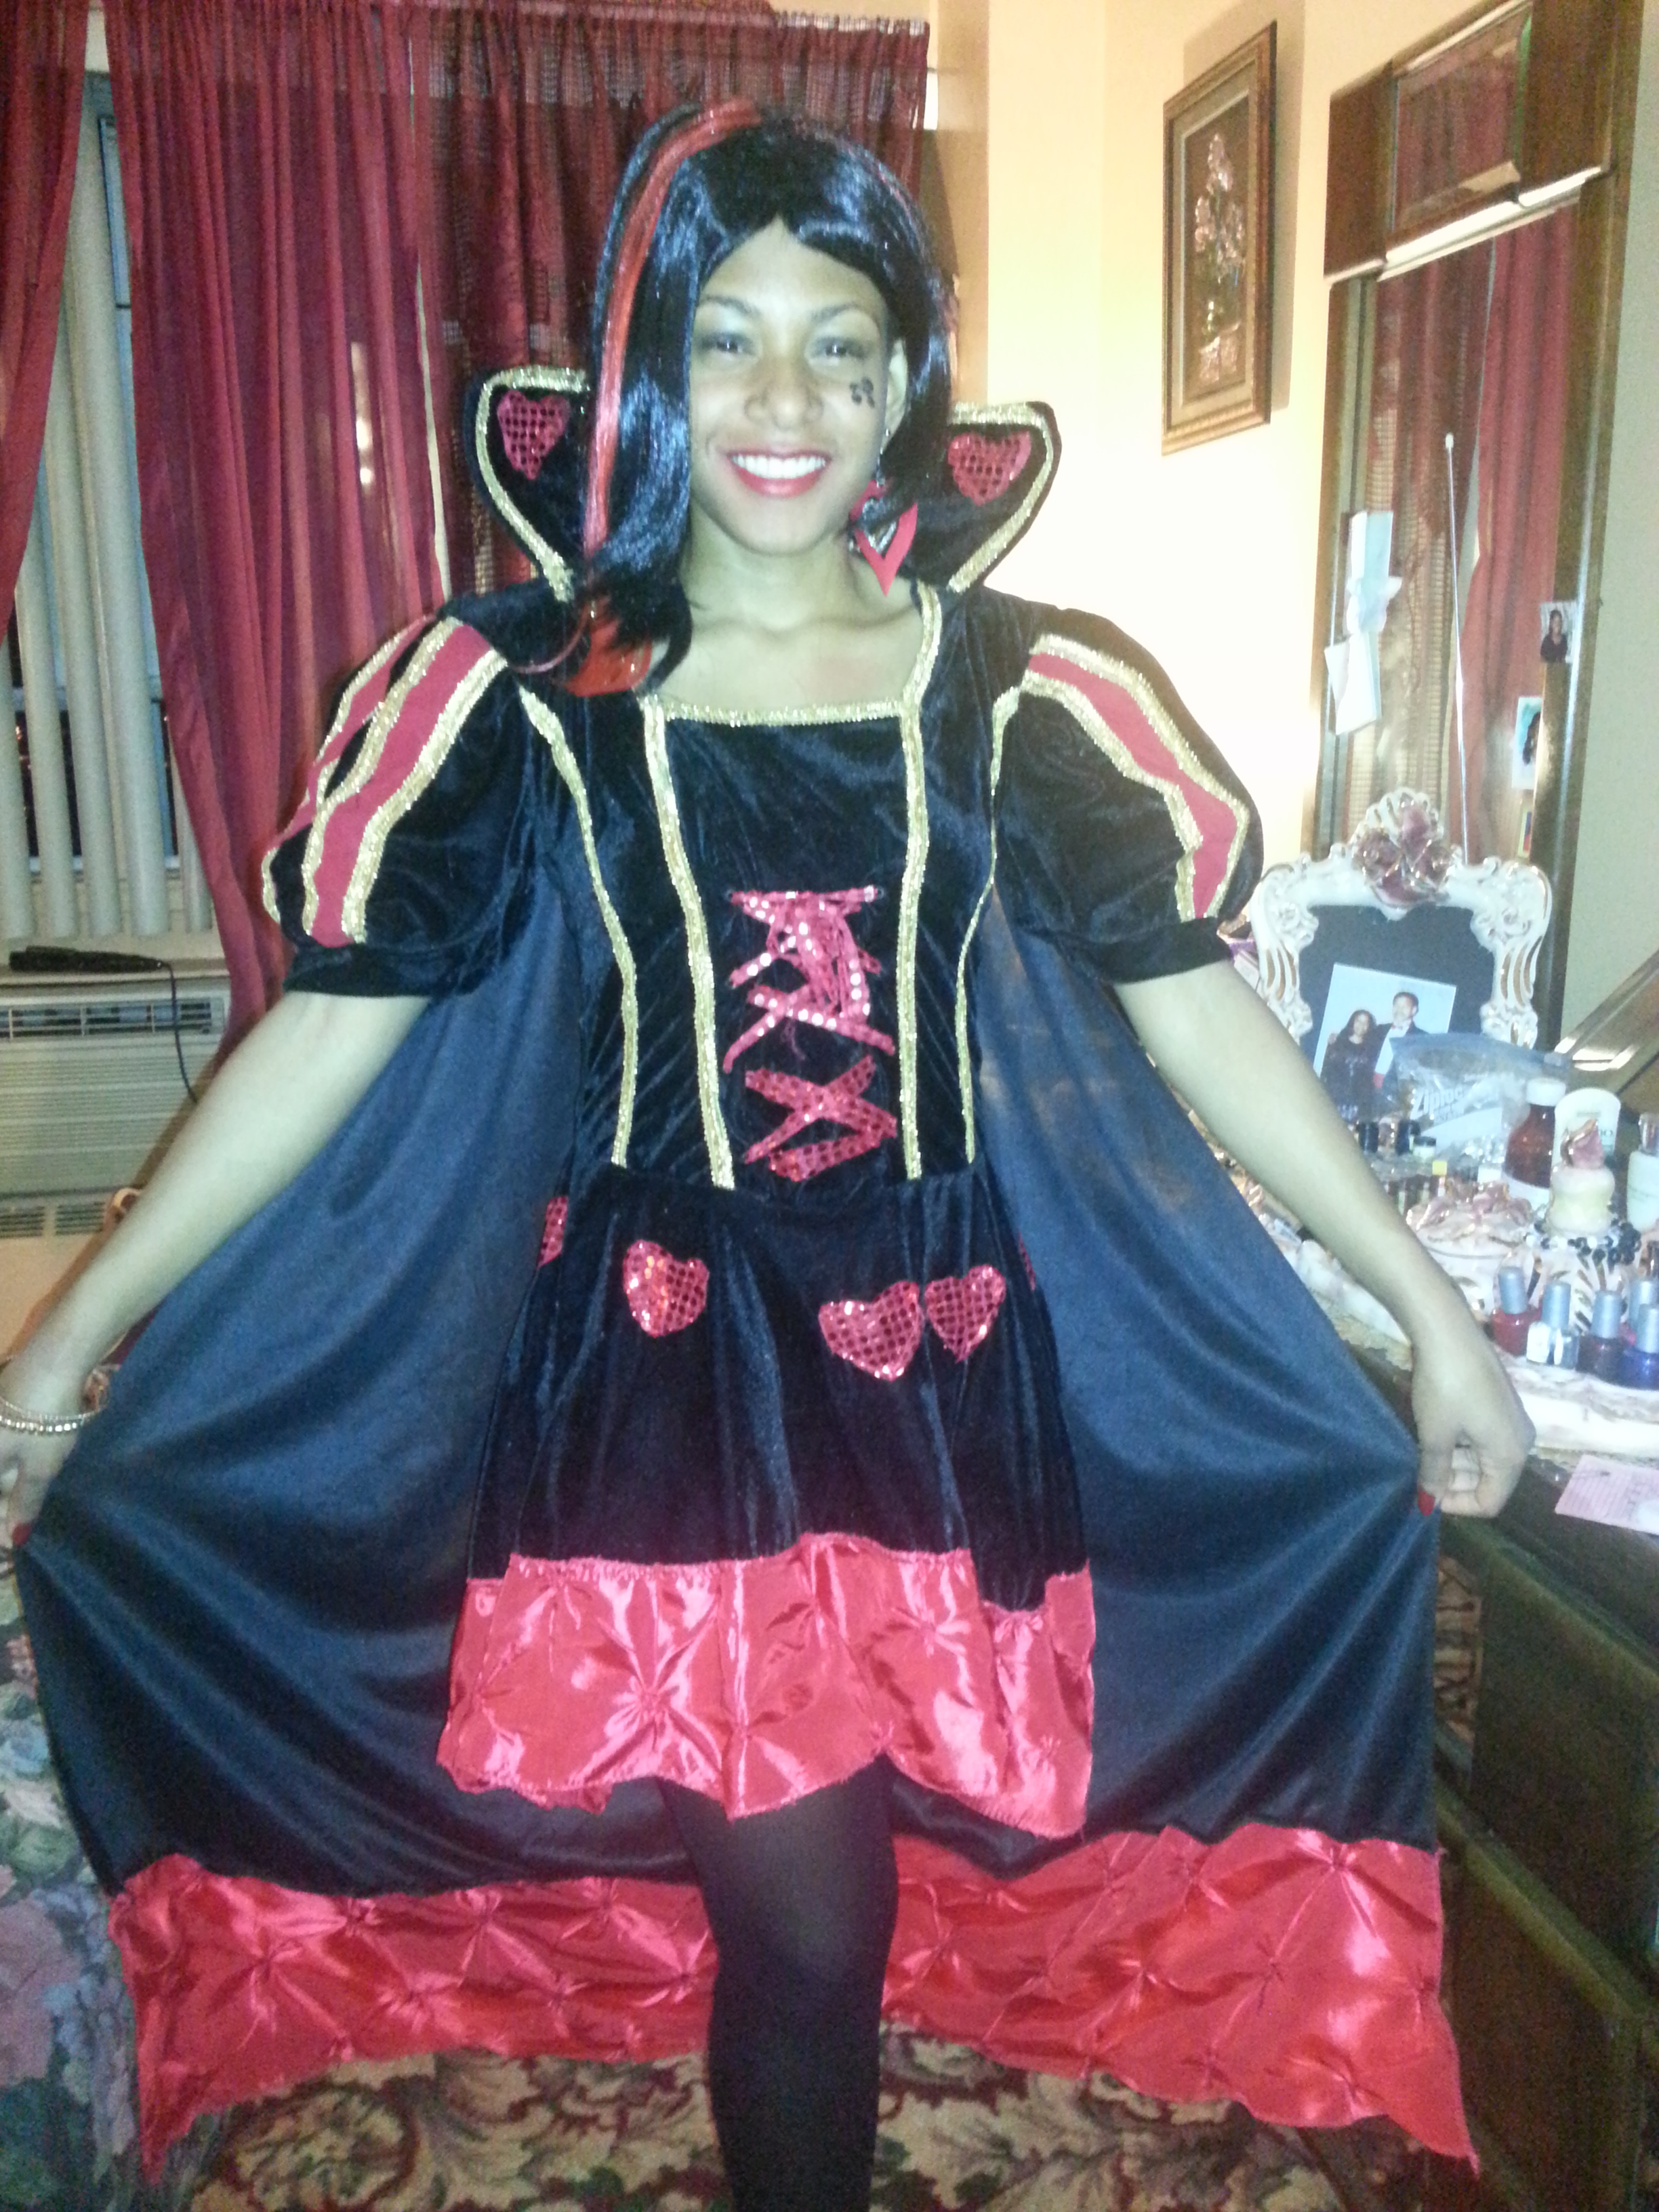 Maylynn on Halloween 2013. She was the Queen of Hearts.